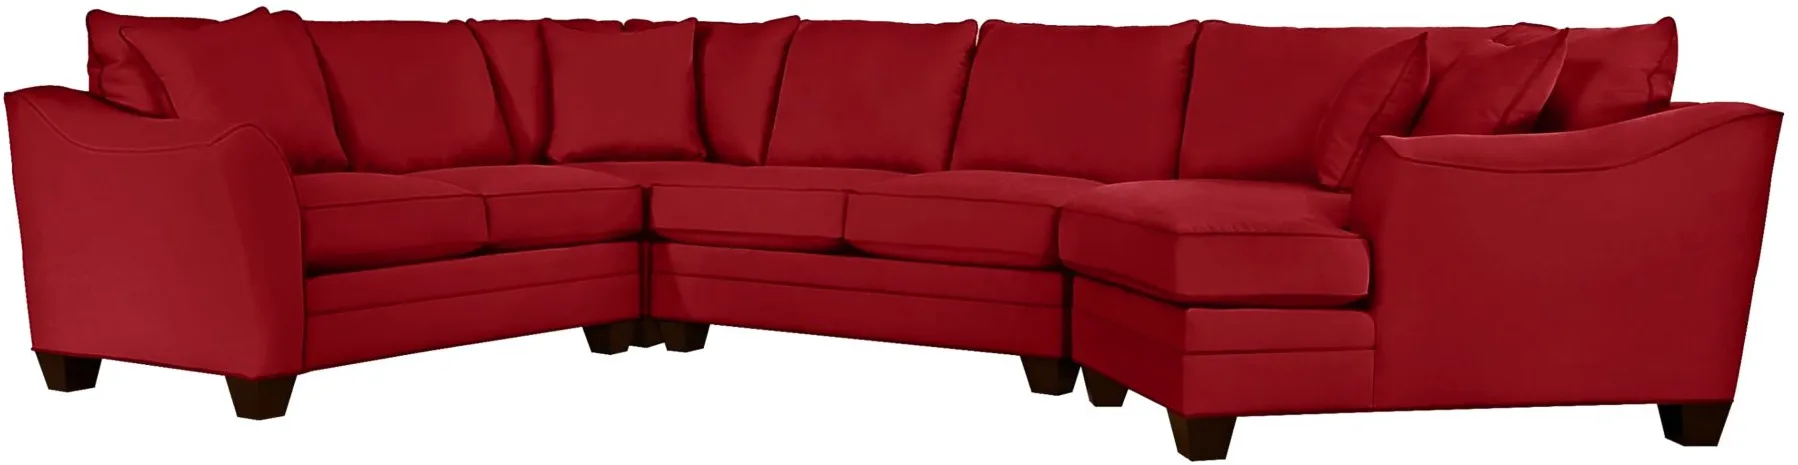 Foresthill 4-pc. Right Hand Cuddler with Loveseat Sectional Sofa in Suede So Soft Cardinal by H.M. Richards